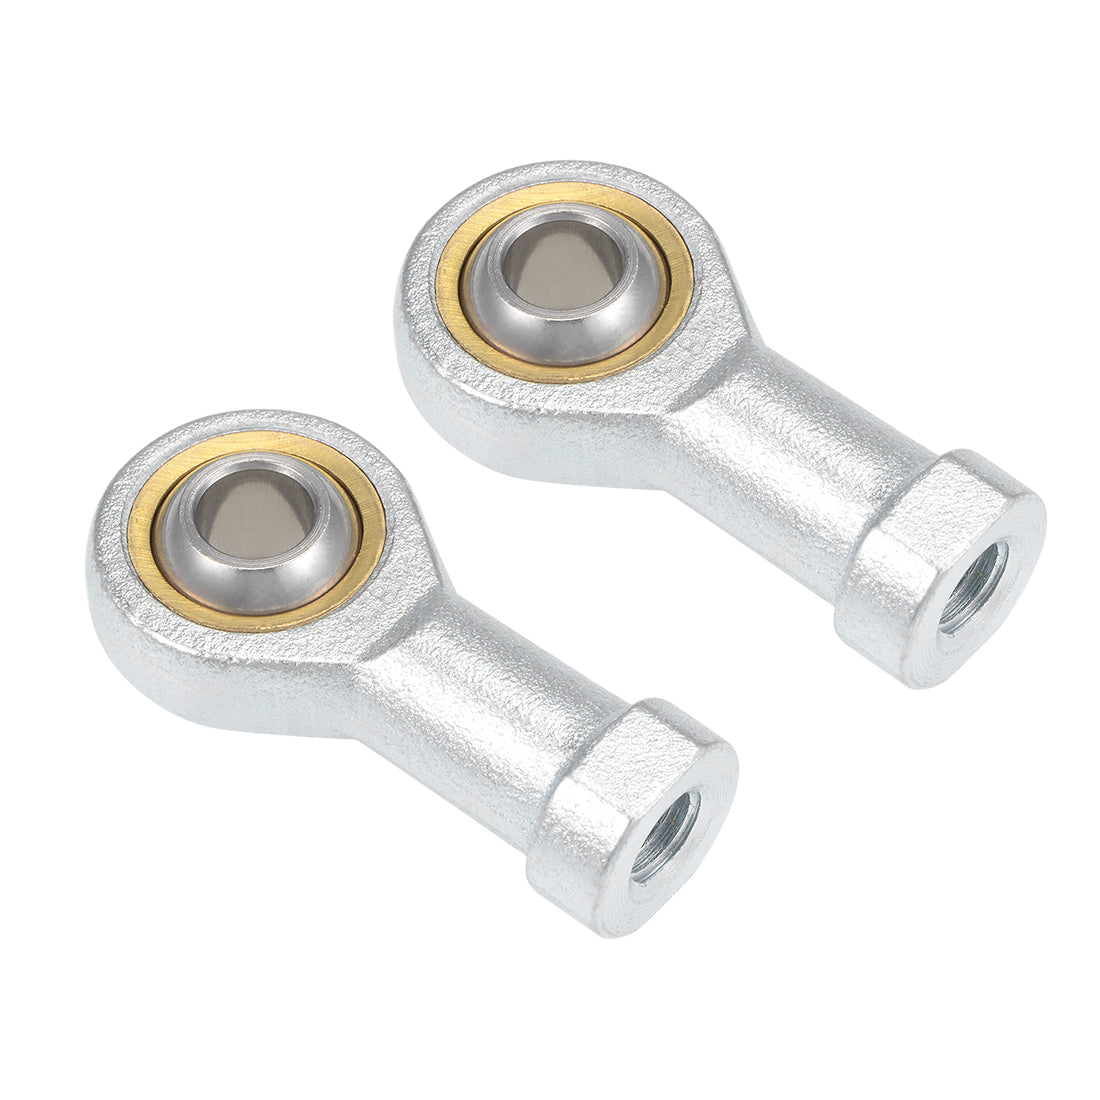 uxcell Uxcell 8mm Rod End Bearing M8x1.25mm Rod Ends Ball Joint Female Right Hand Thread 2pcs